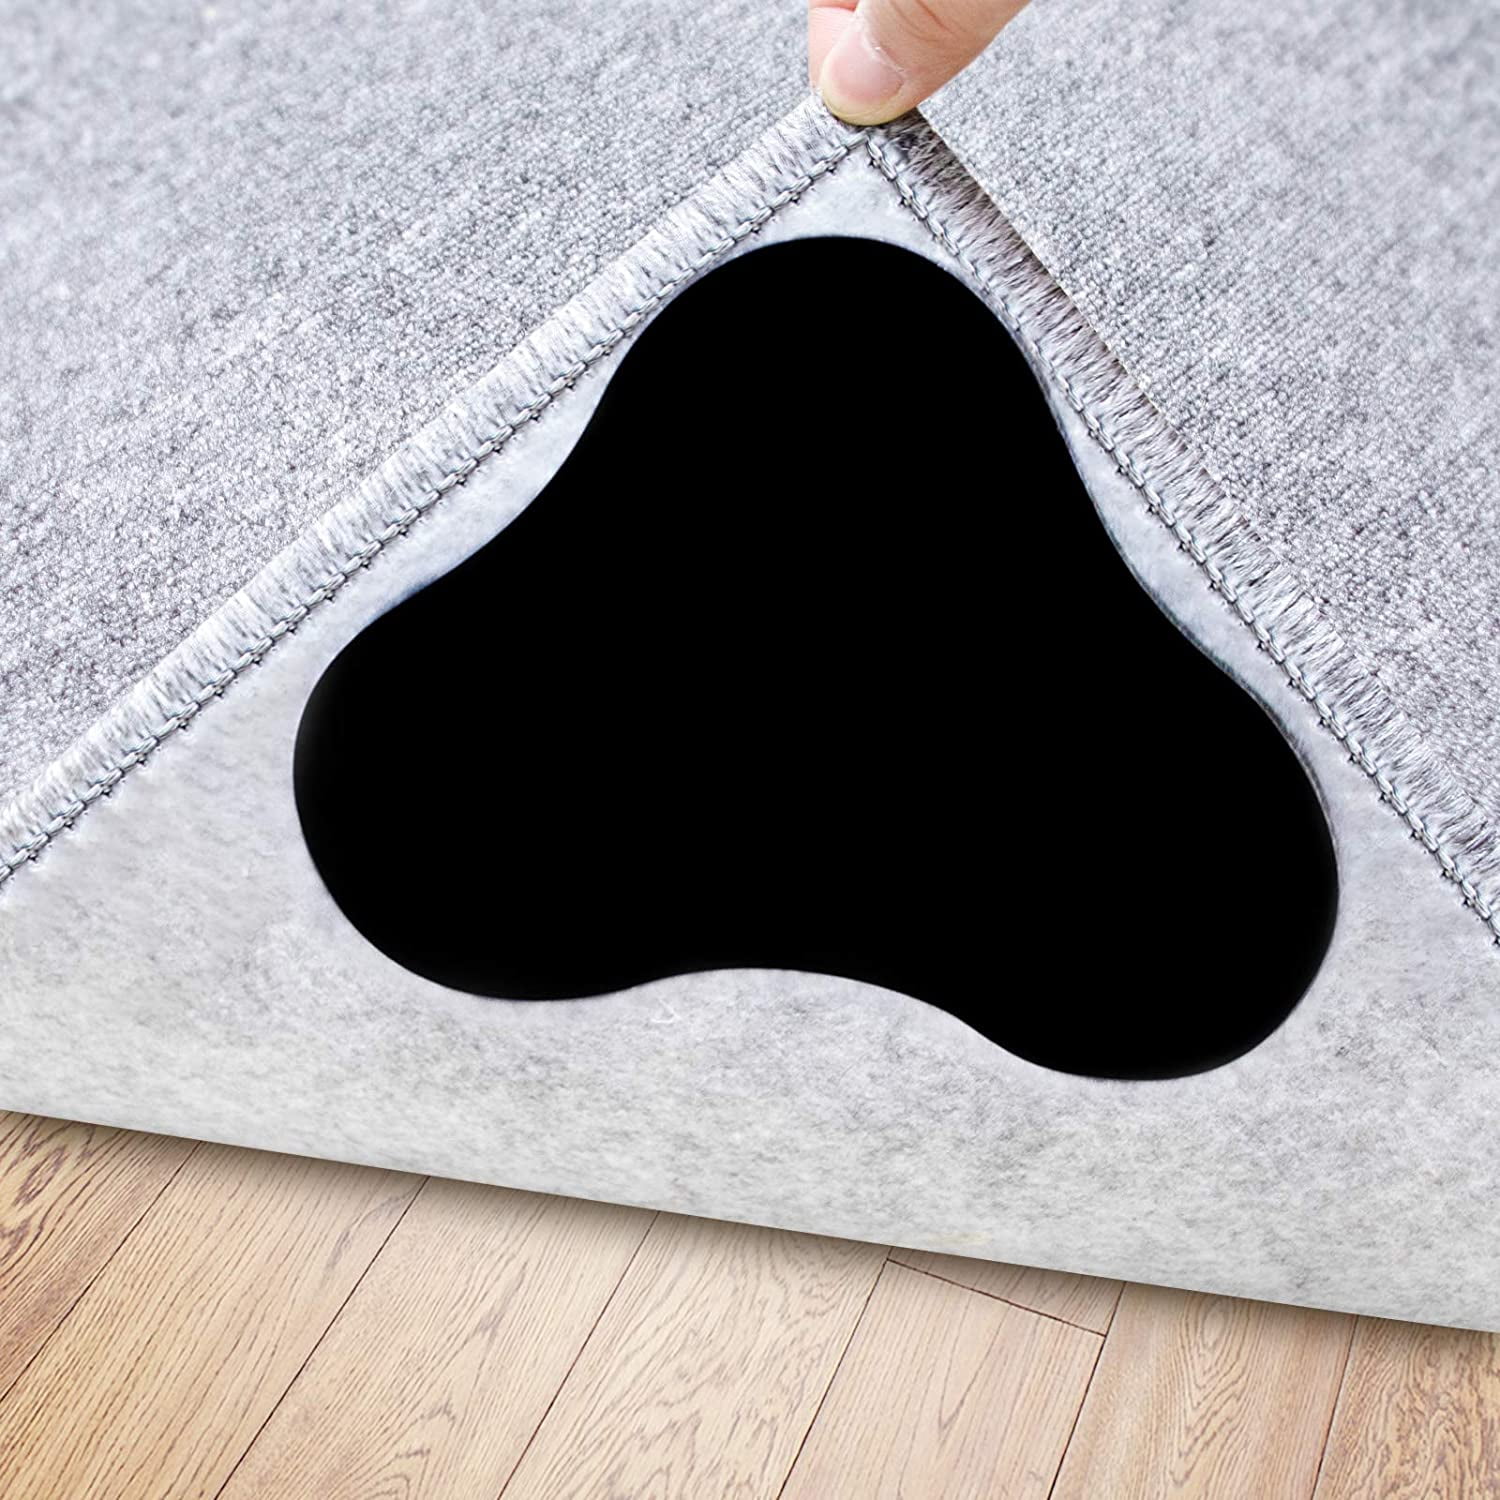 2x Extra Strong Double Sided Carpet Grip Tape Rug Sticker Anti Slip Slide Curlin 